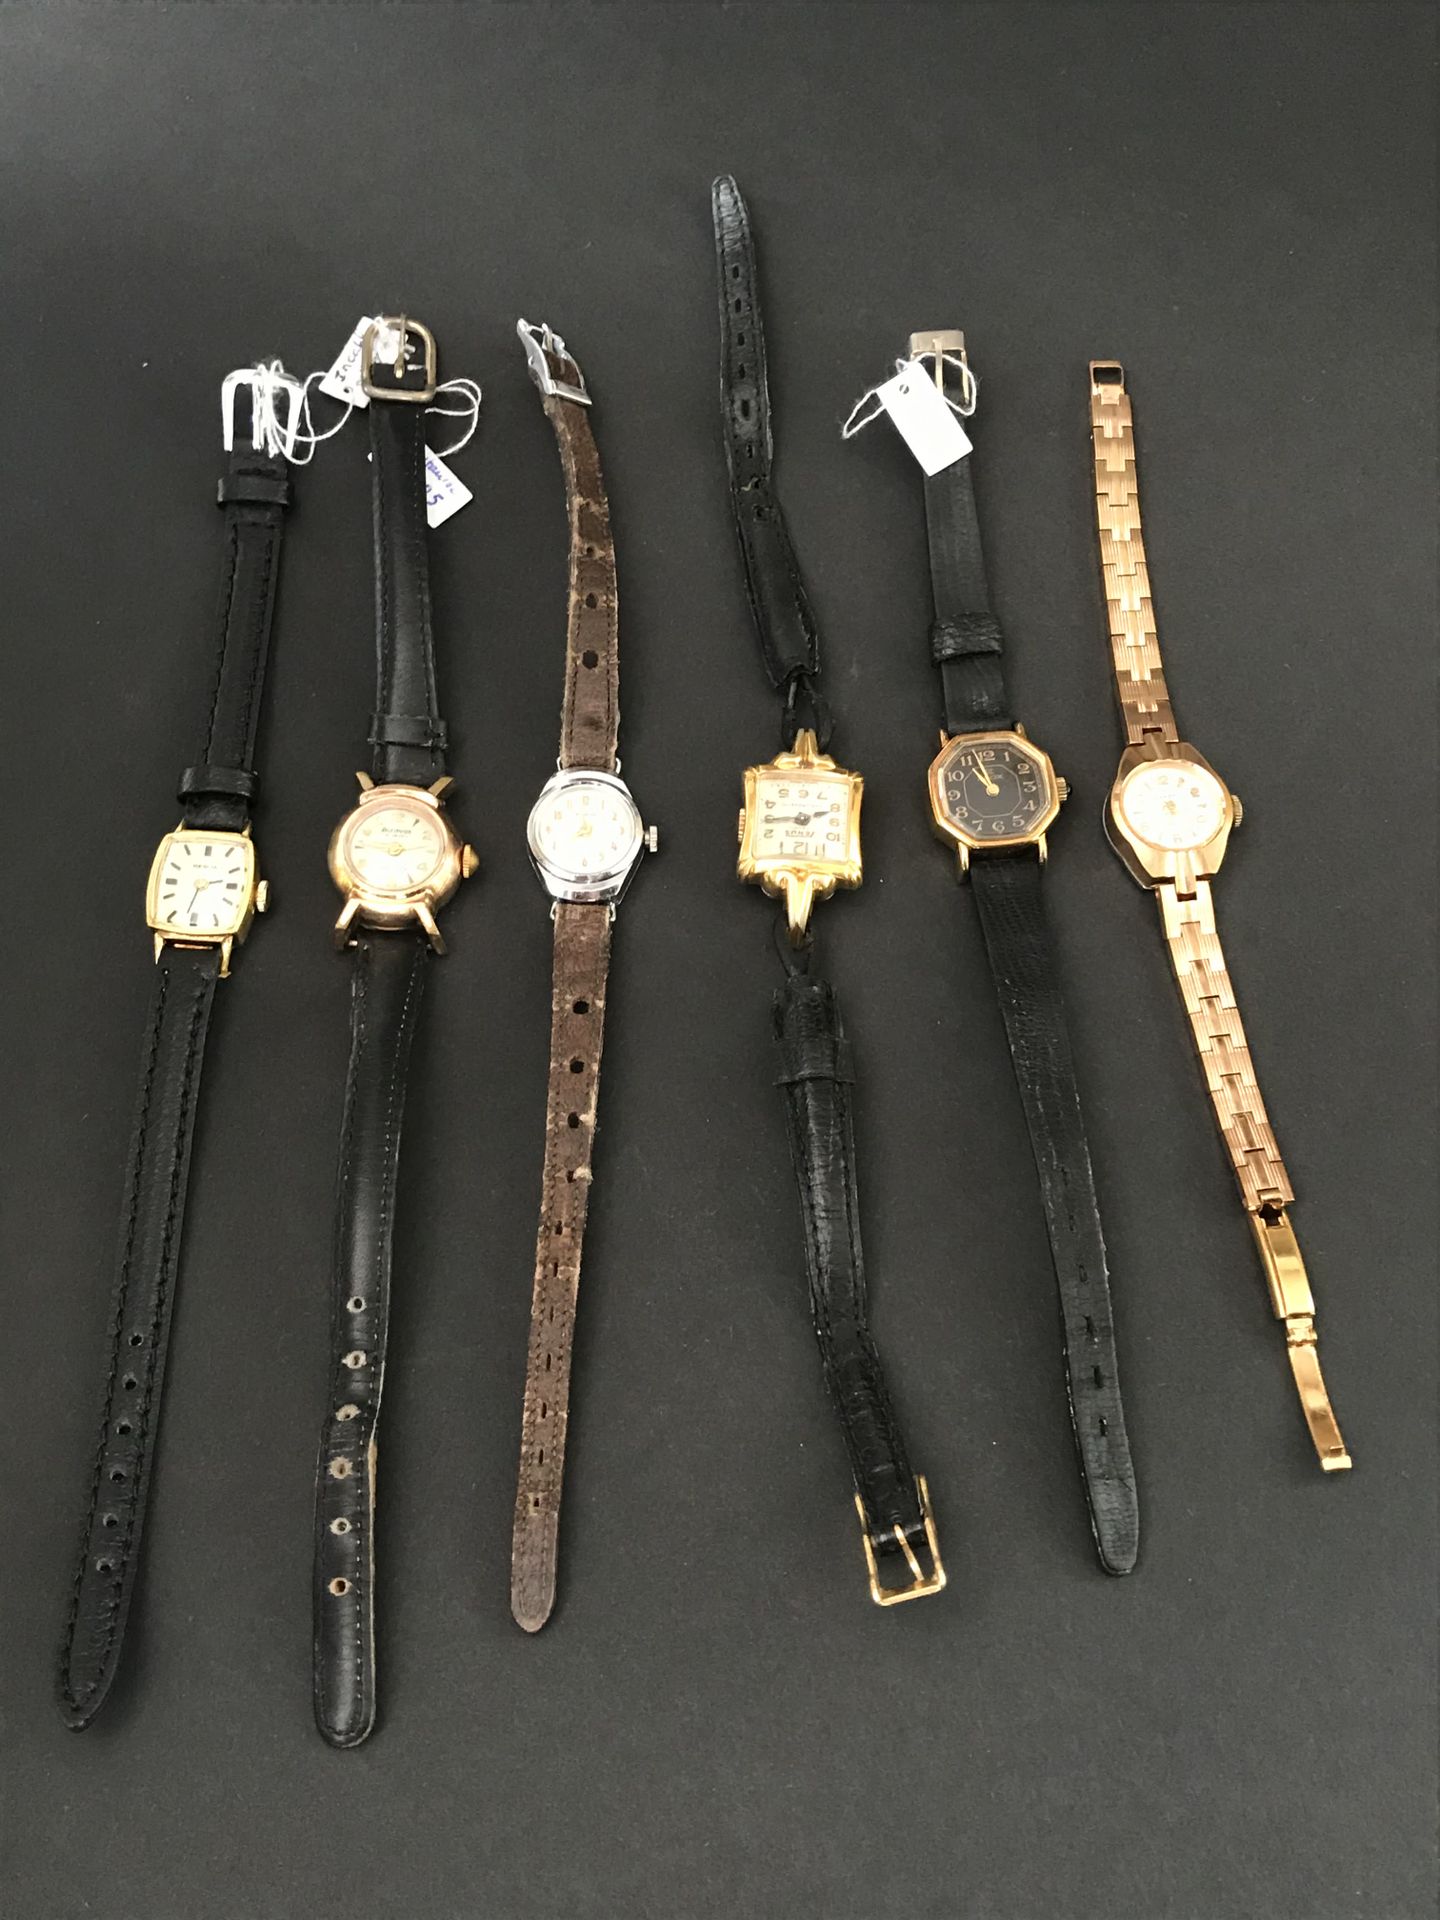 Null Lot of six Ladies Watches

leather and metal straps

In working order